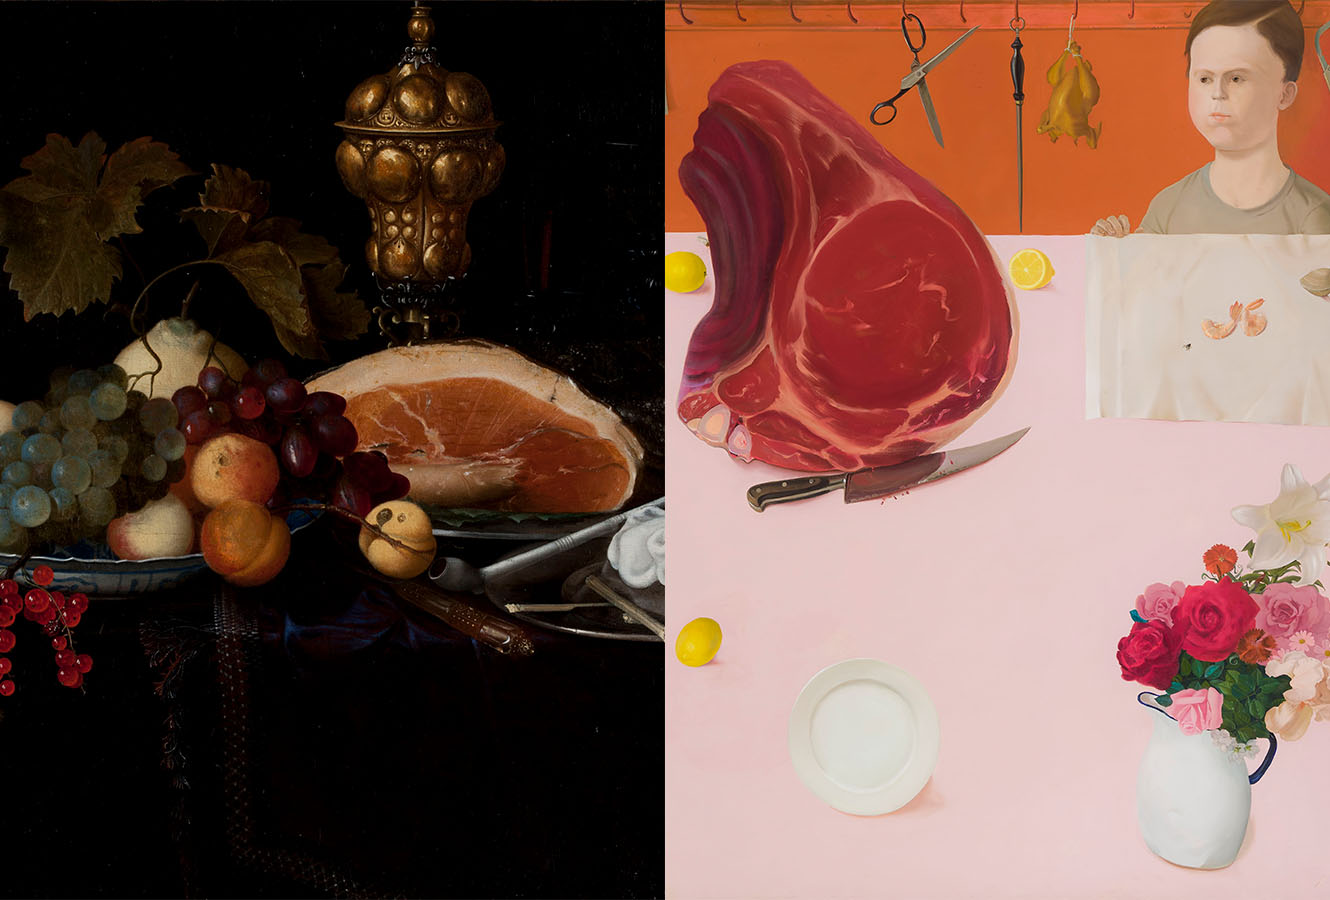 Still life painting of fruits and meat. Painting of young woman and large steak.